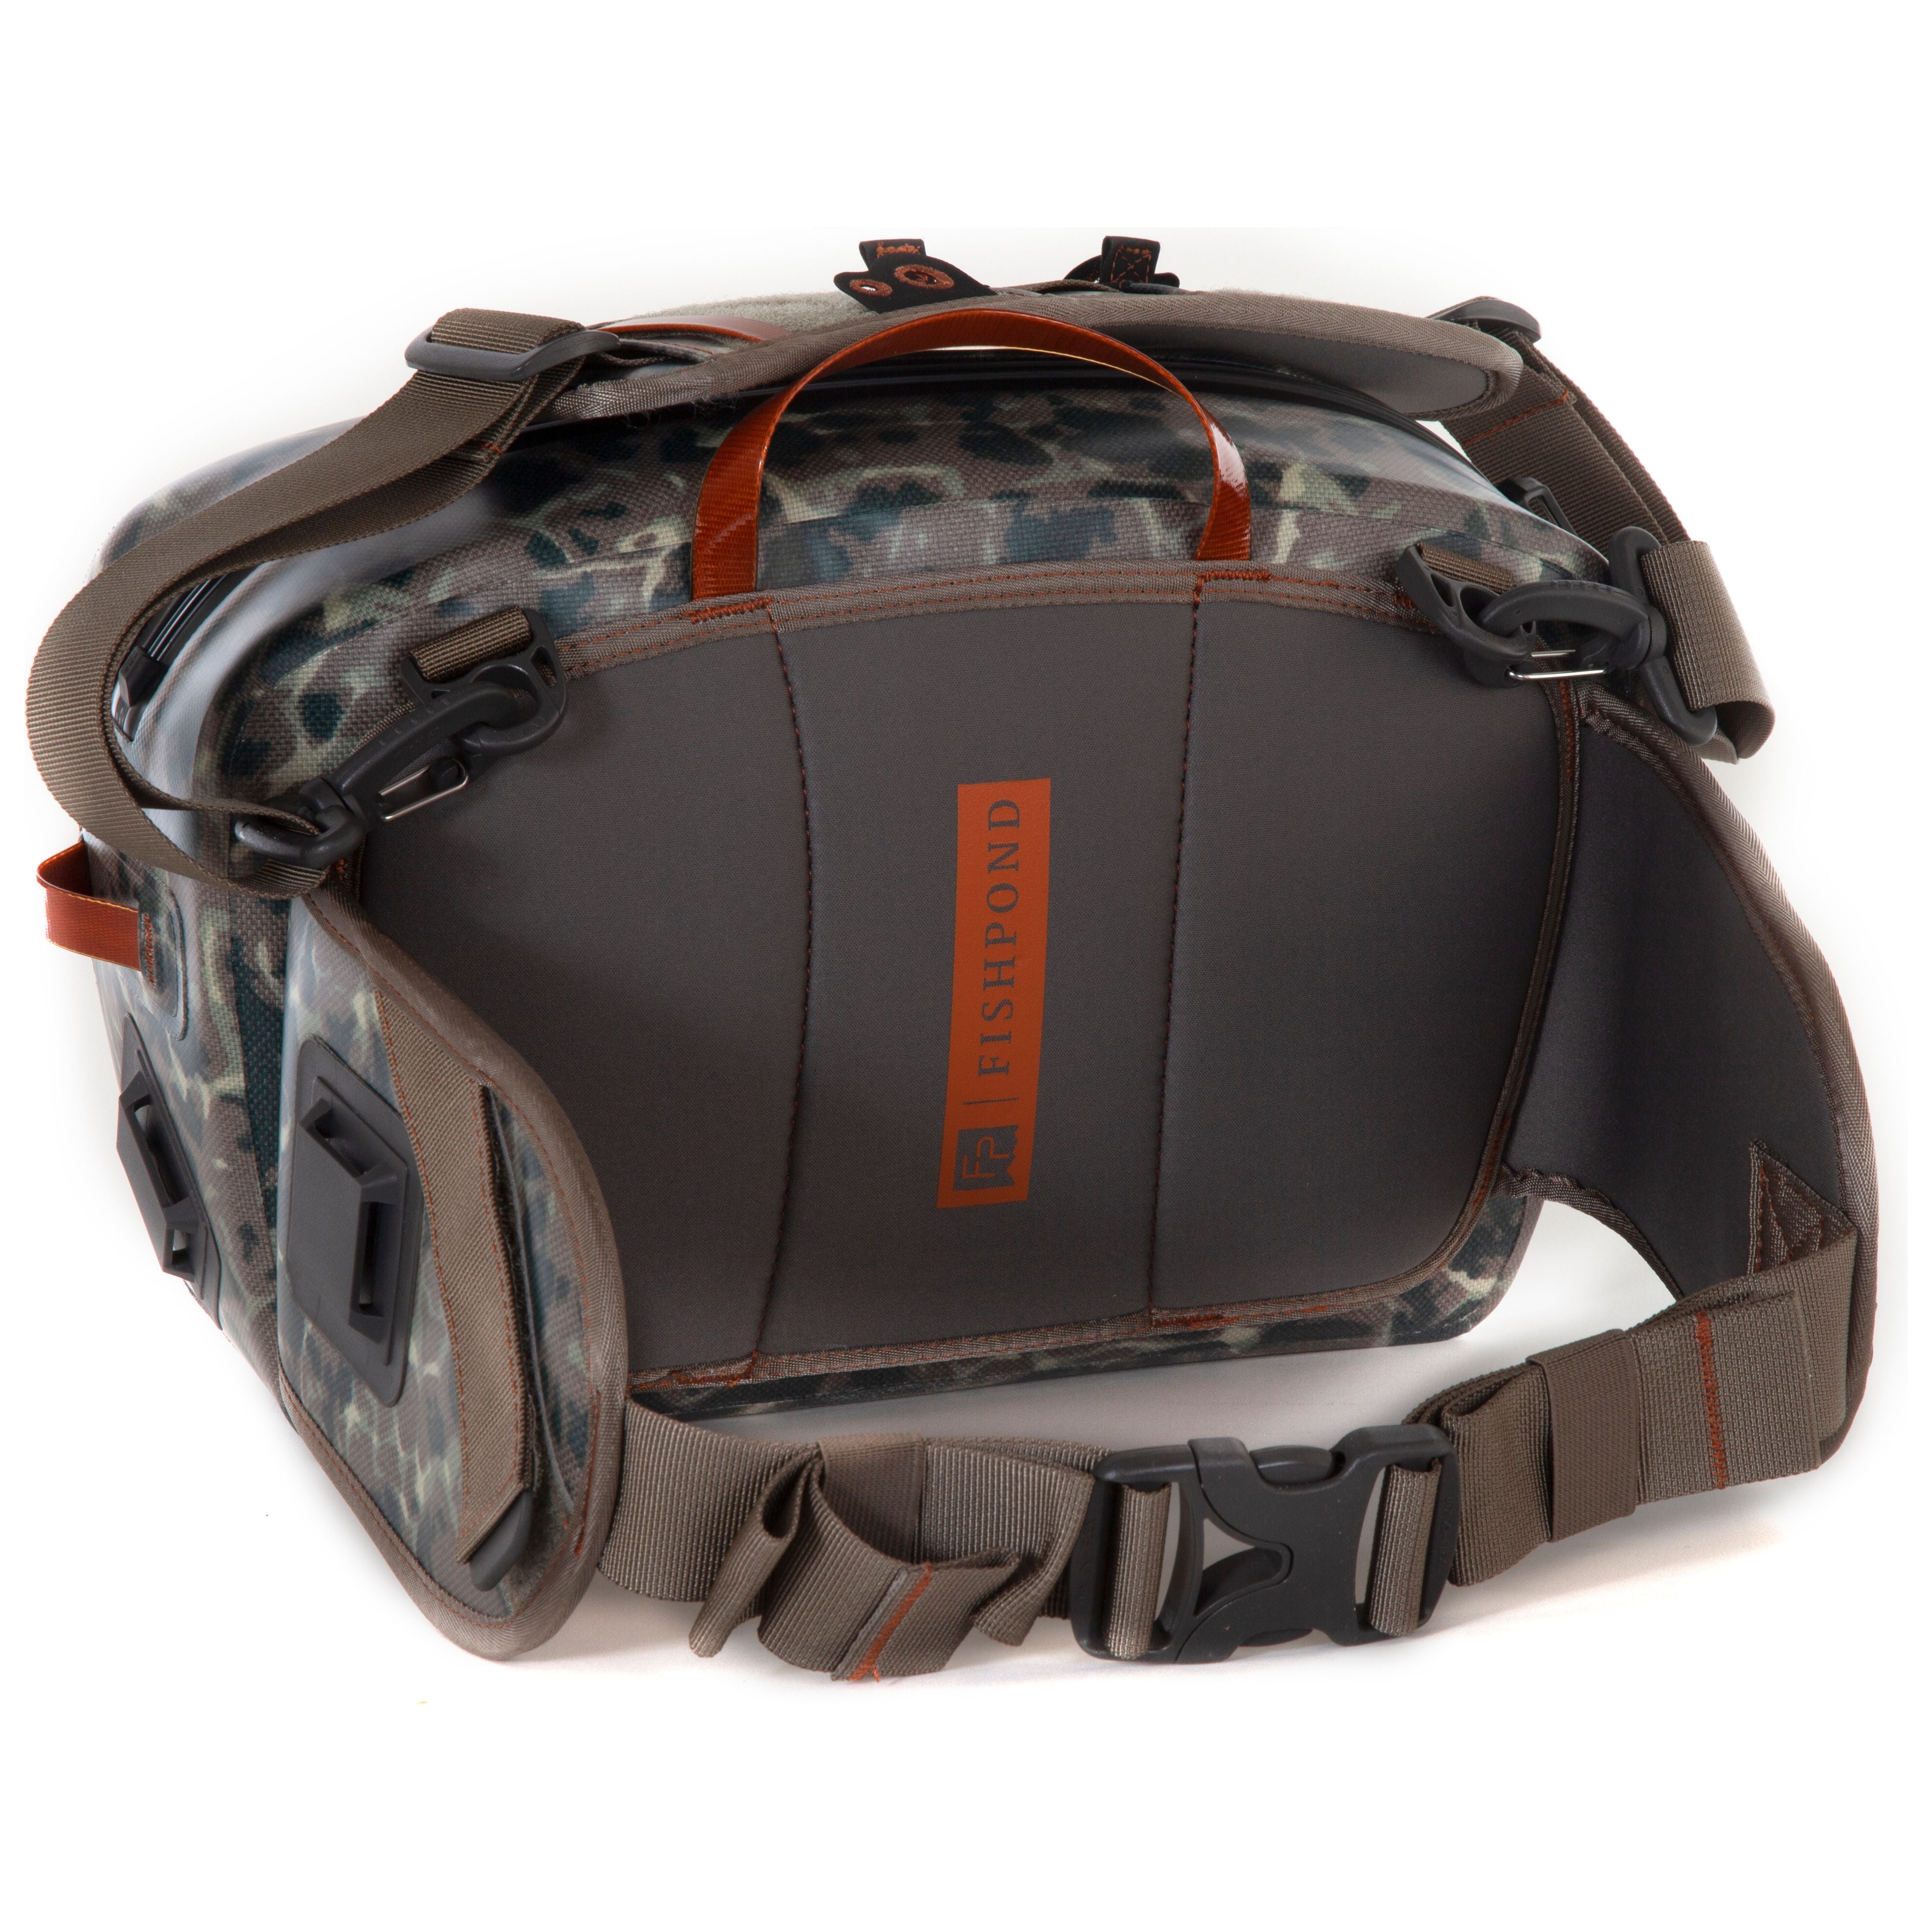 Fishpond Thunderhead Submersible Sling - Eco - Riverbed Camo